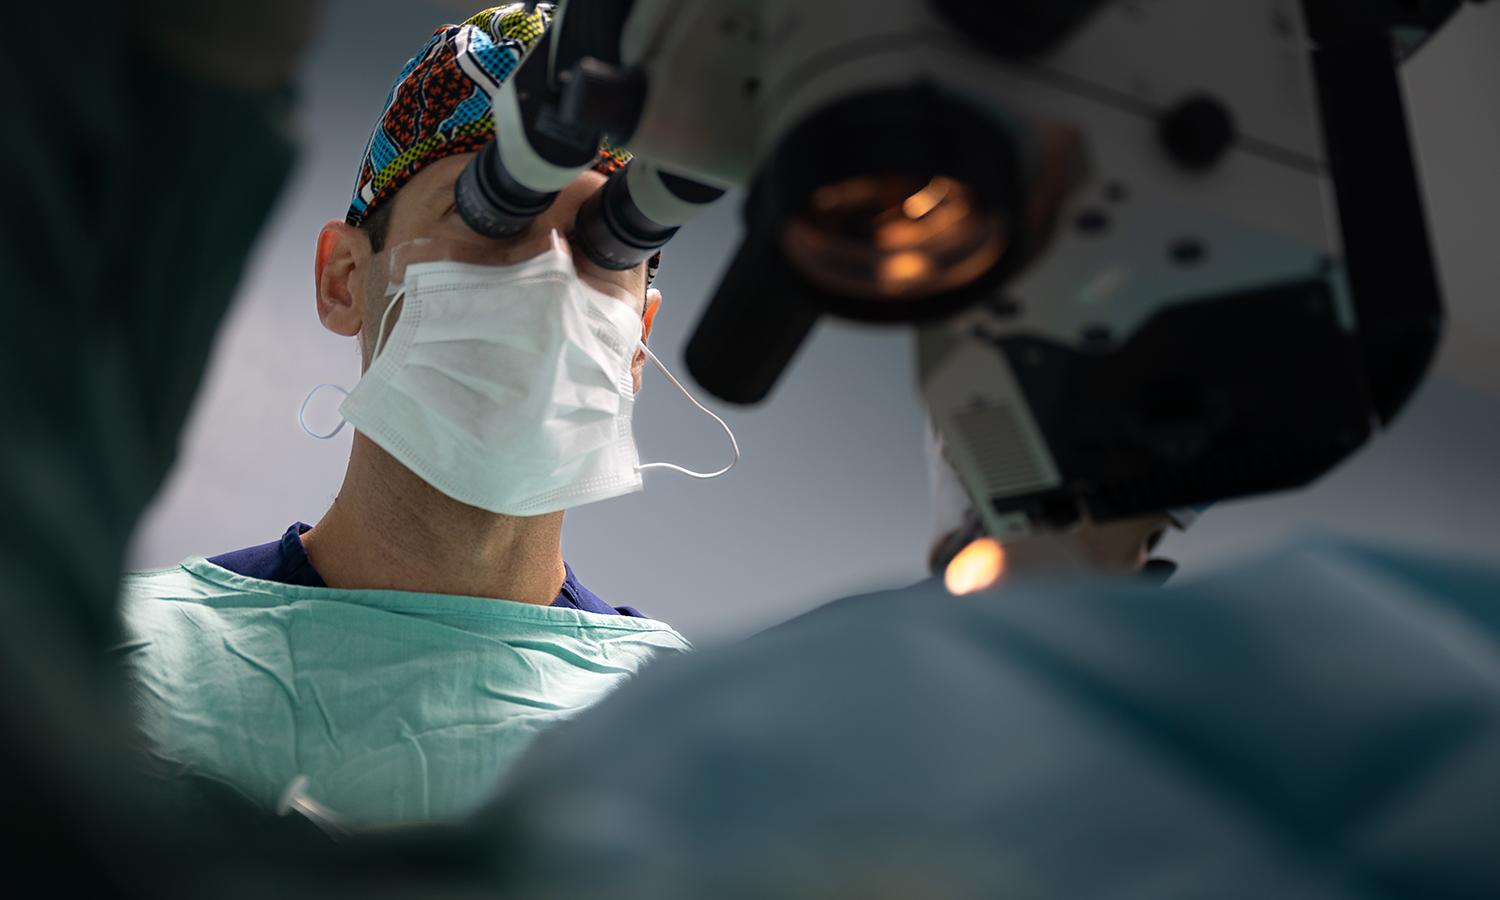 An ophthalmologist performs surgery on a patient